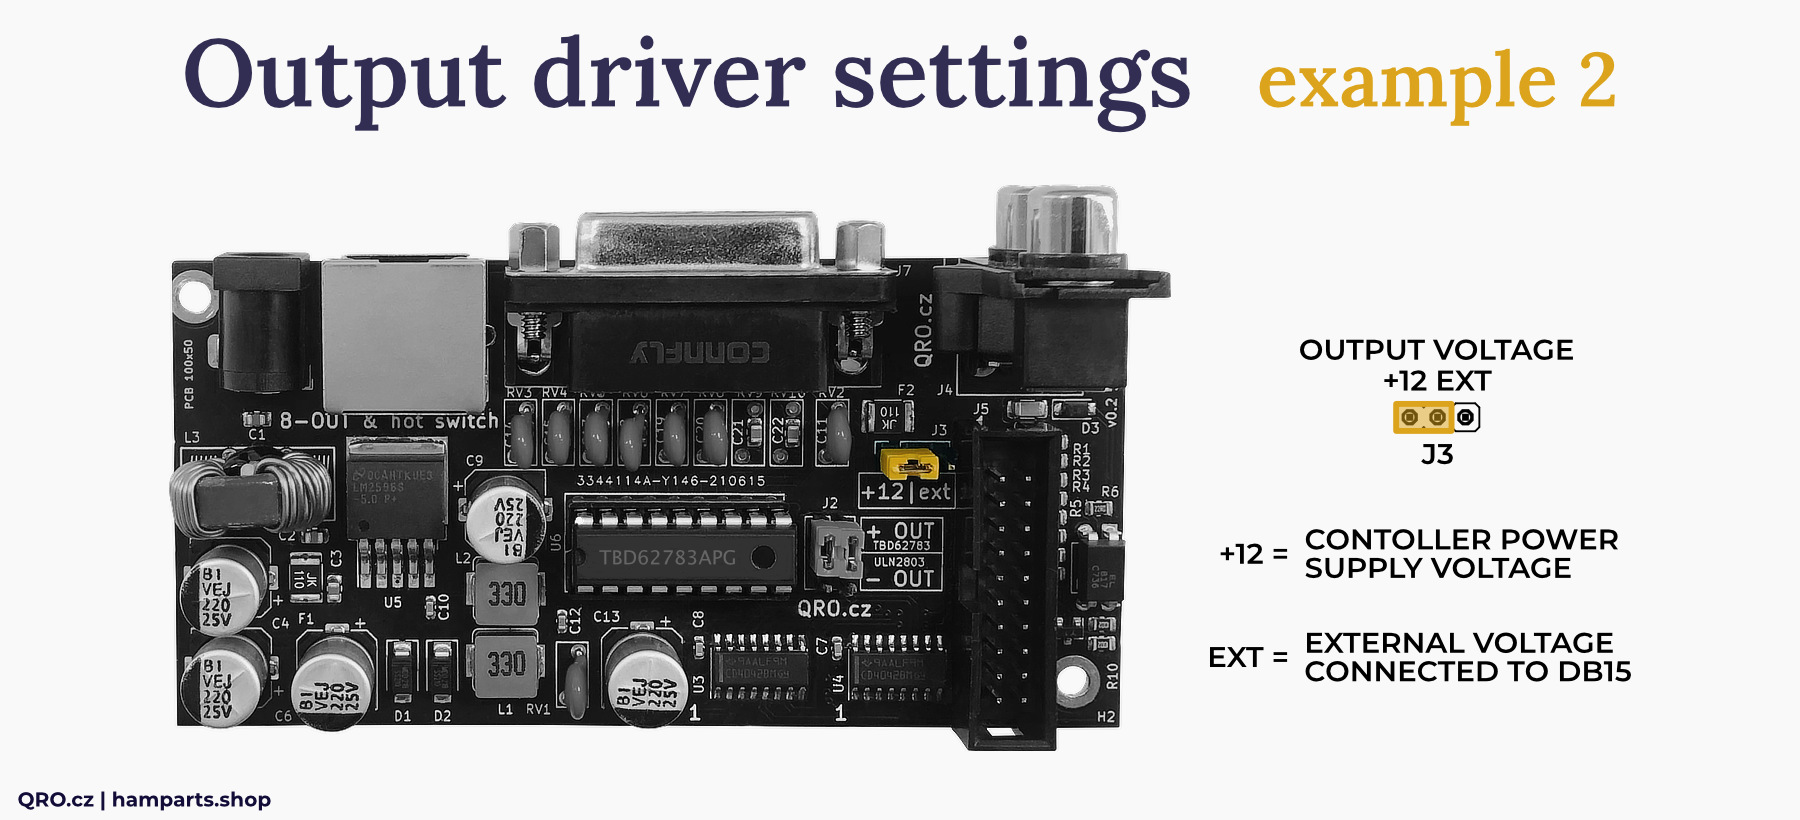 easy controller output driver settings qro.cz hamparts.shop